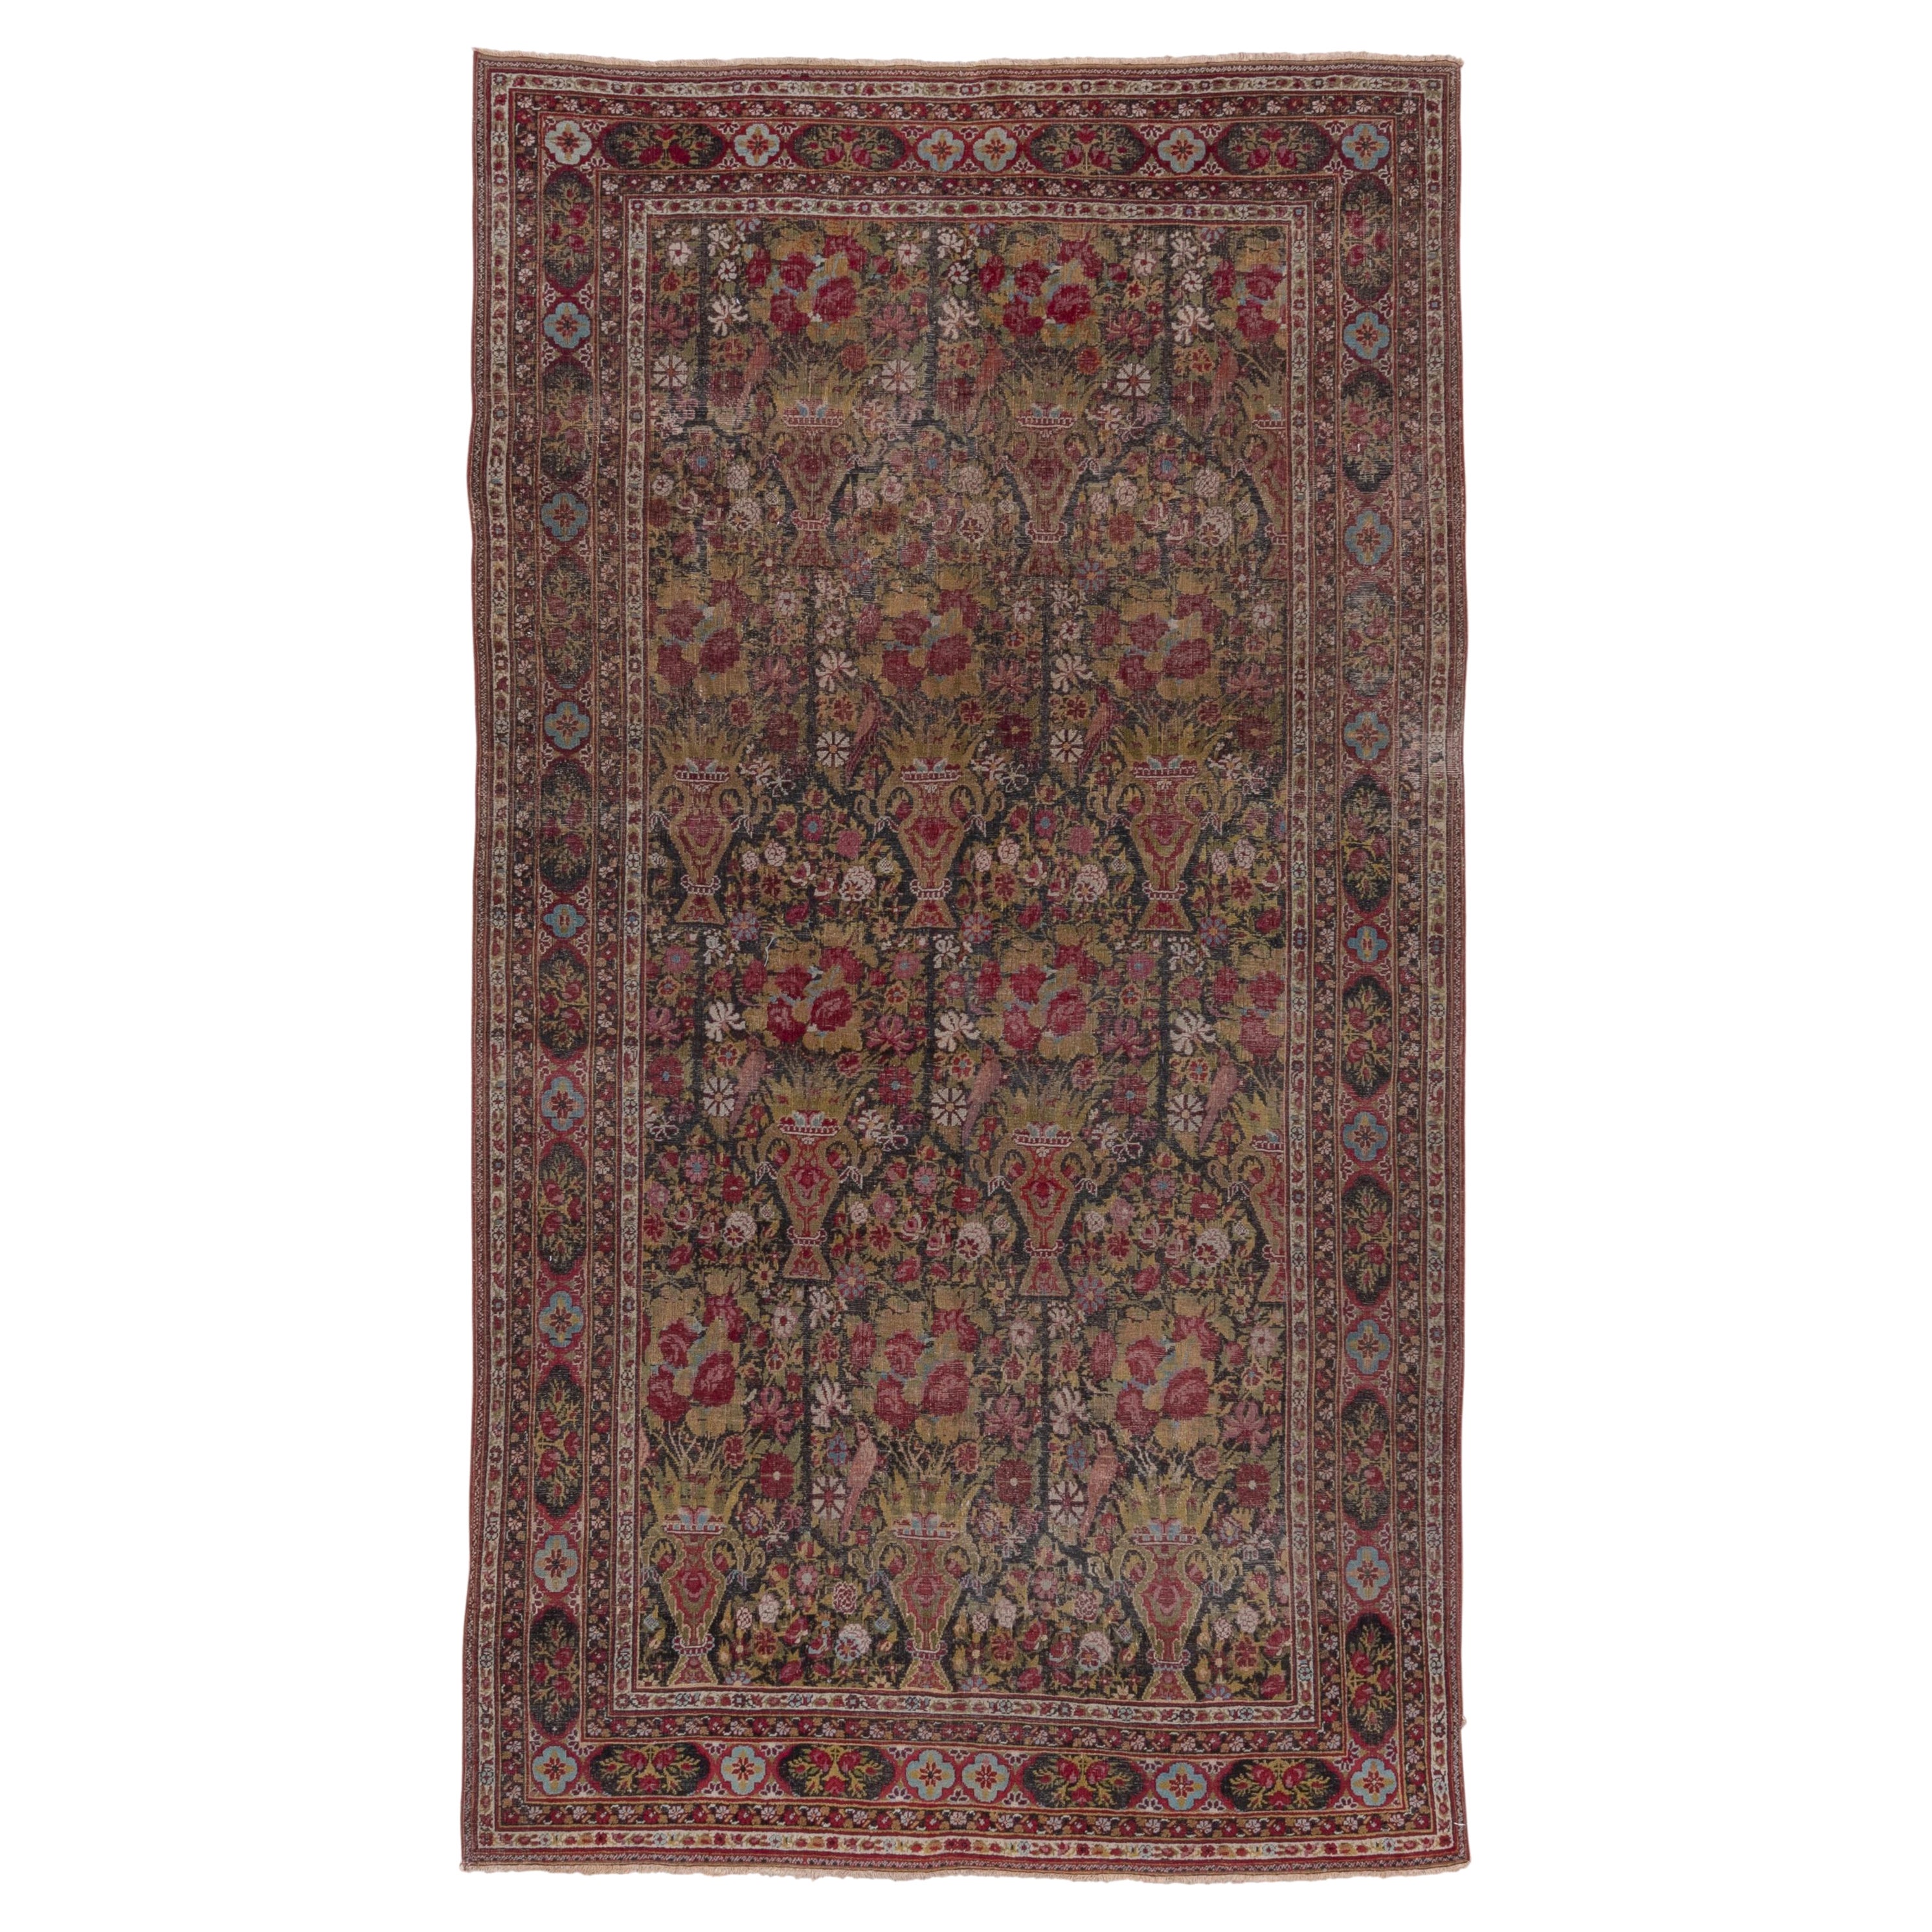 Finely Woven Antique Indian Agra Rug, Vase Design Field, Wine & Chartreuse Tones For Sale